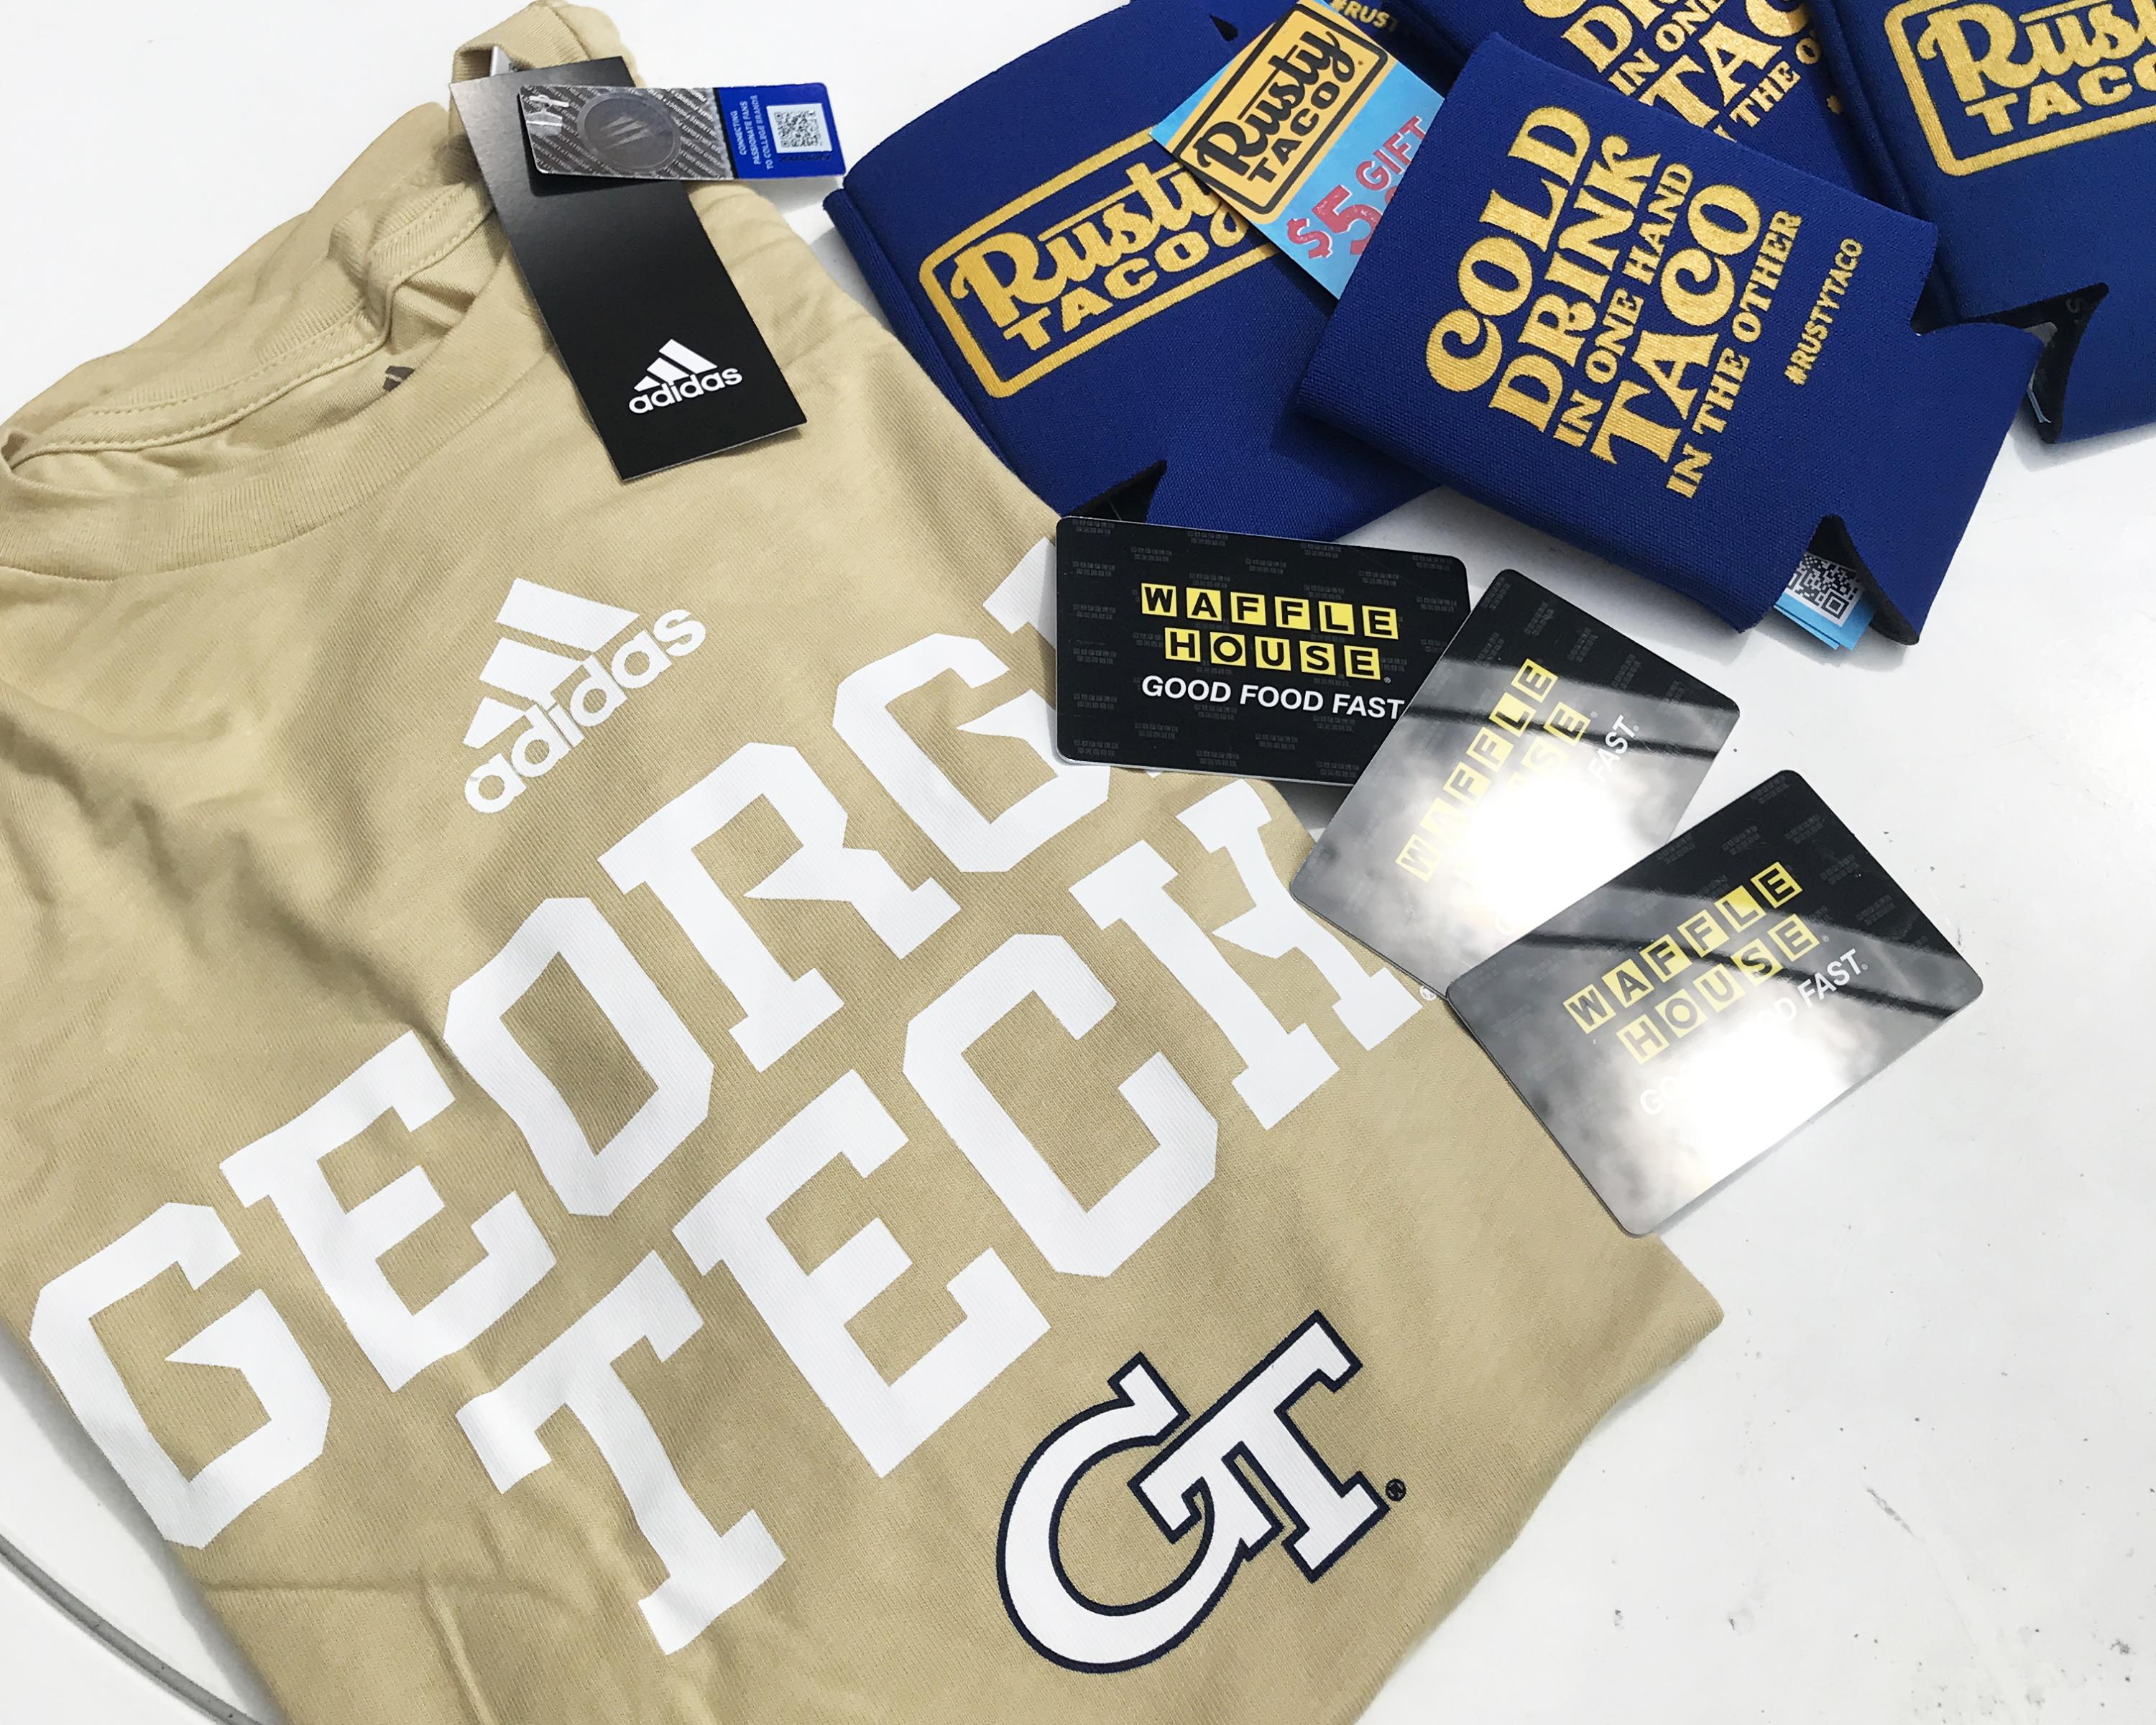 Georgia Tech Athletics t-shirts, local restaurant discounts, and gift cards are among the rewards you could receive through surprise swag drops and random drawings this month for those who get vaccinated on campus or who participate in weekly asymptomatic surveillance testing at Tech.